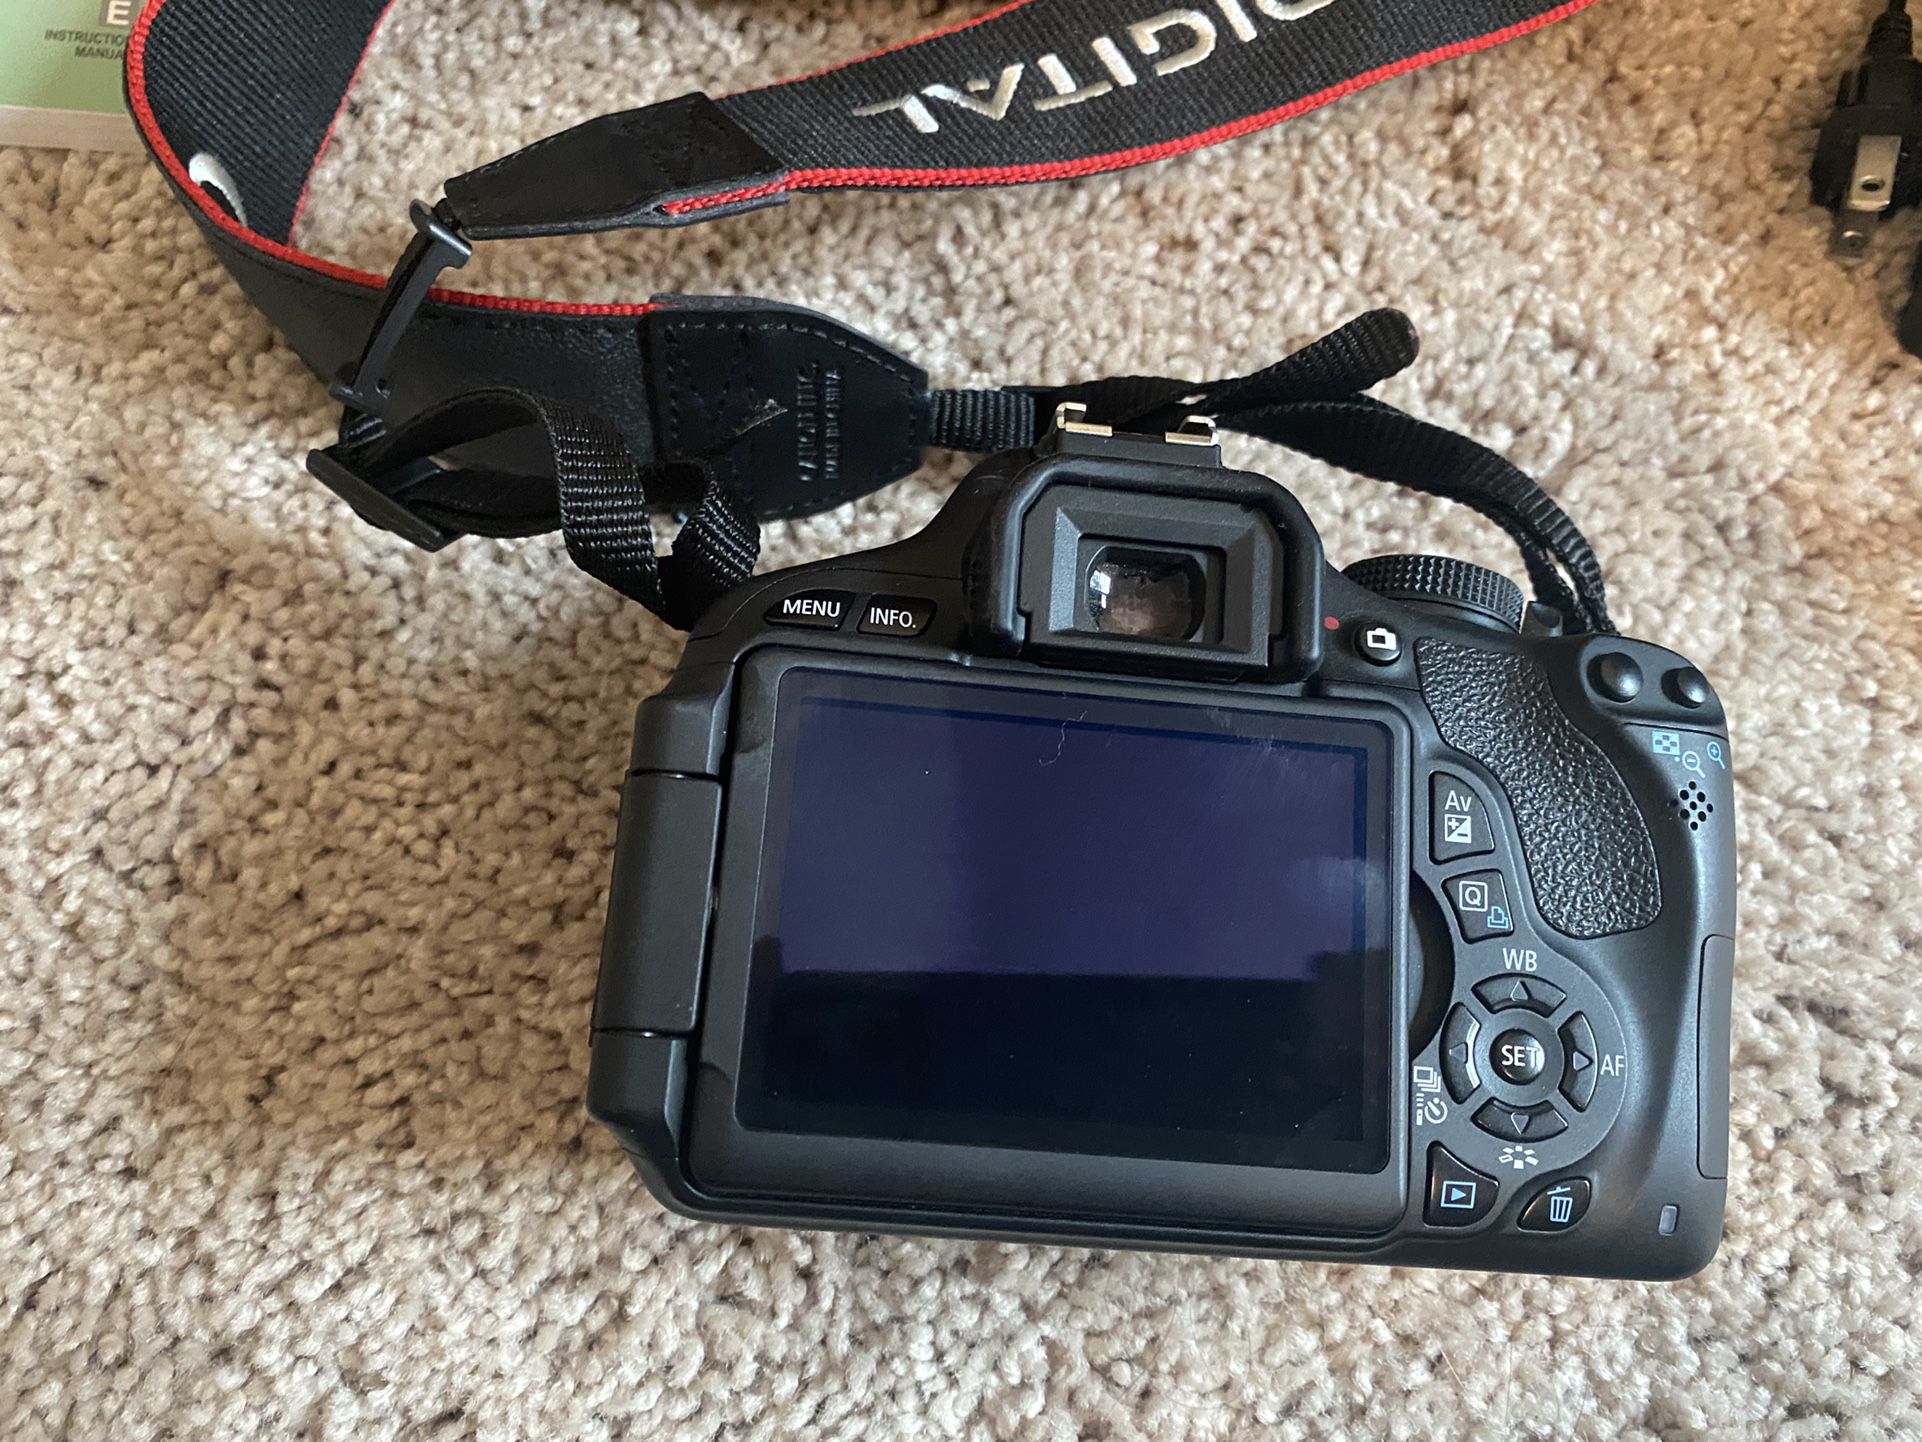 Excellent condition Canon EOS Rebel camera with two lenses, battery charger, and large camera bag.